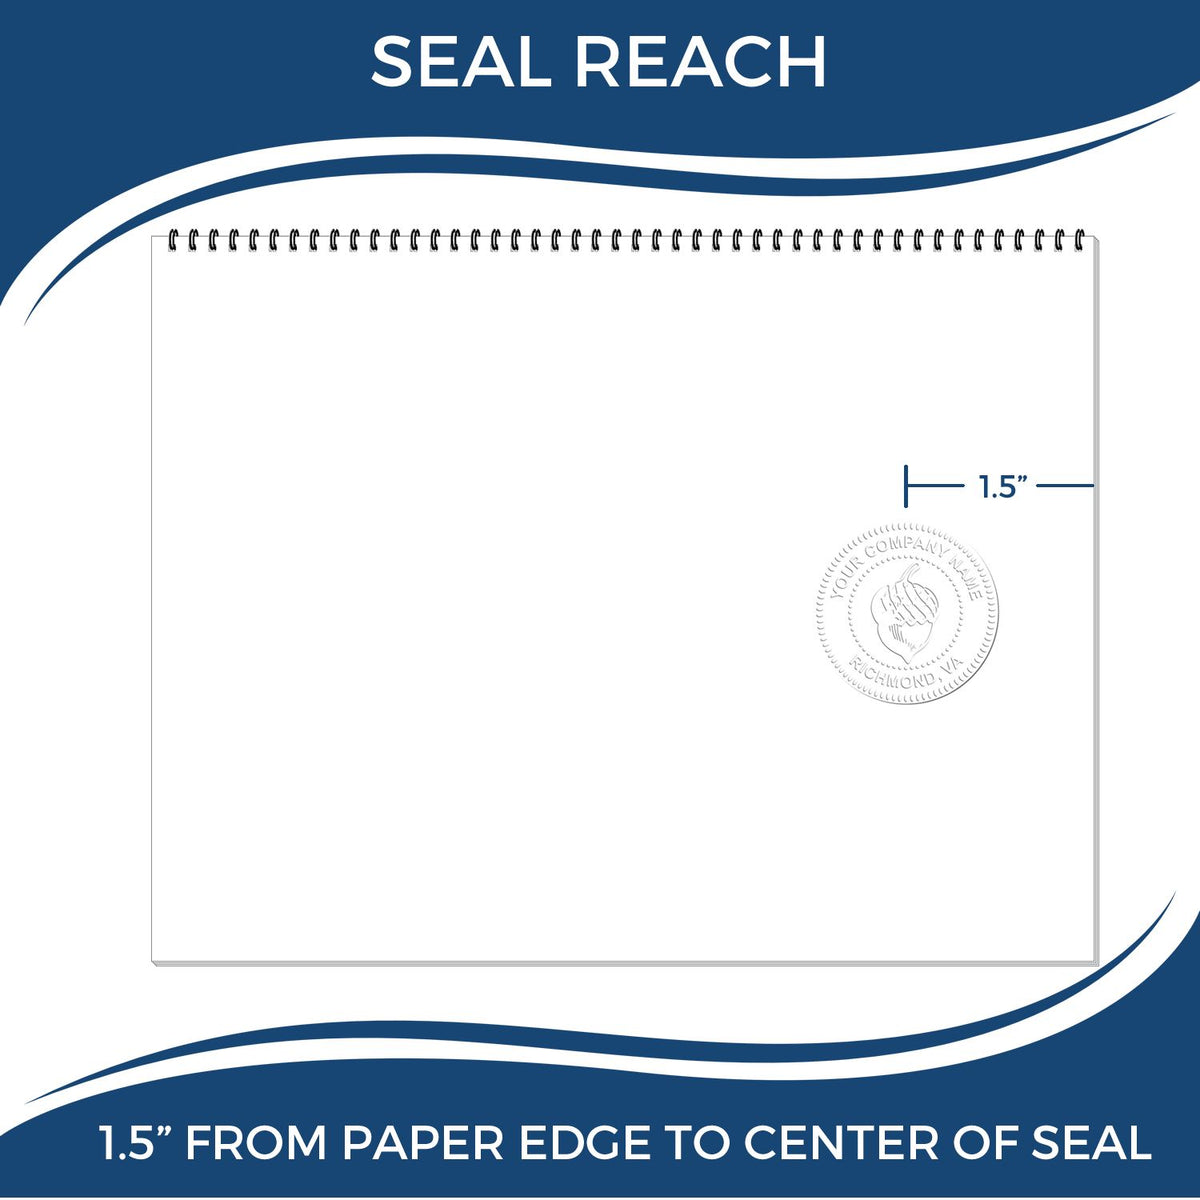 An infographic showing the seal reach which is represented by a ruler and a miniature seal image of the Hybrid Idaho Land Surveyor Seal